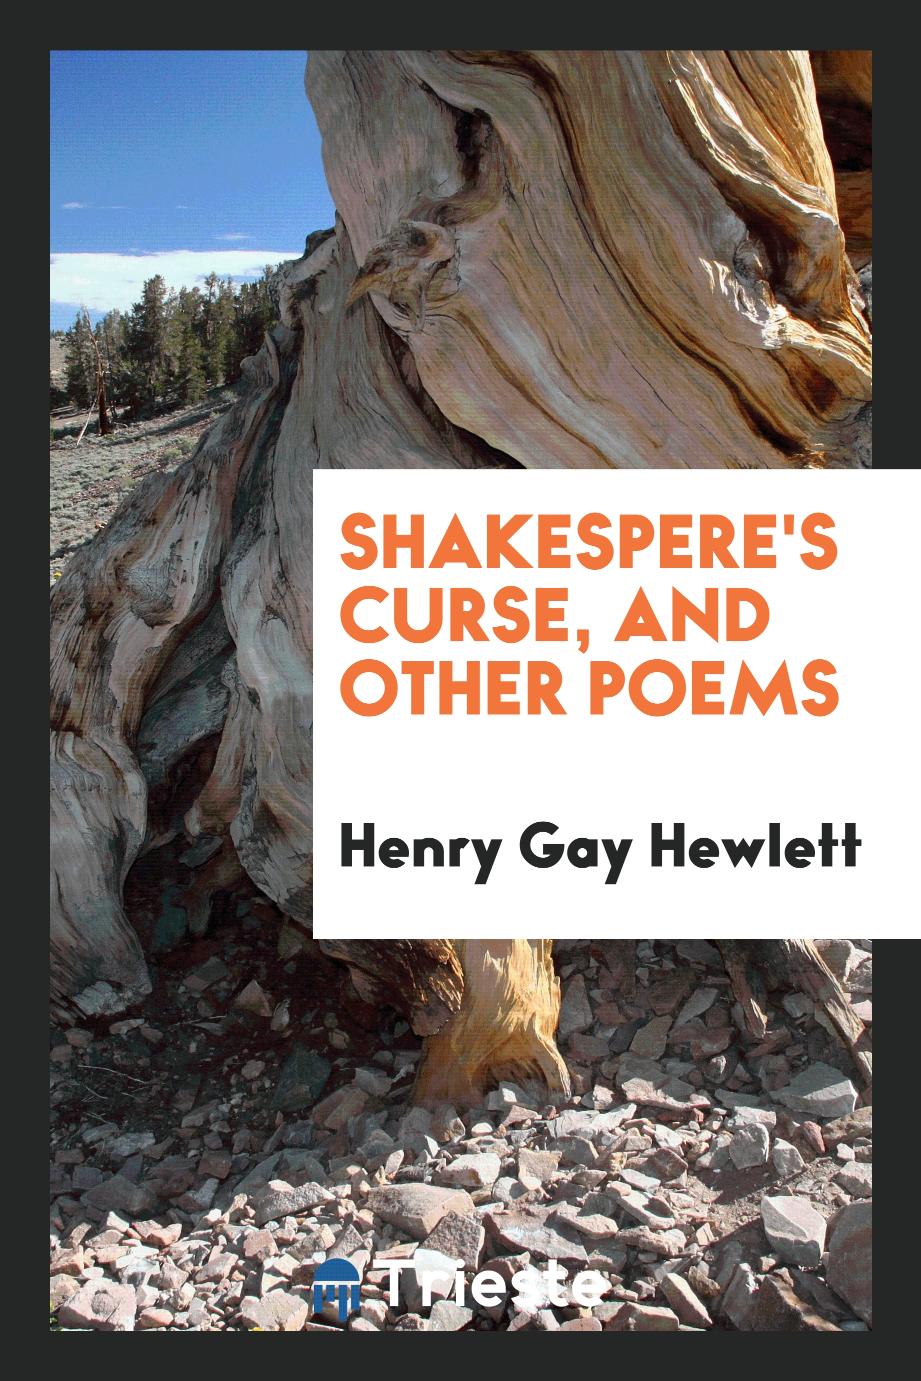 Shakespere's curse, and other poems